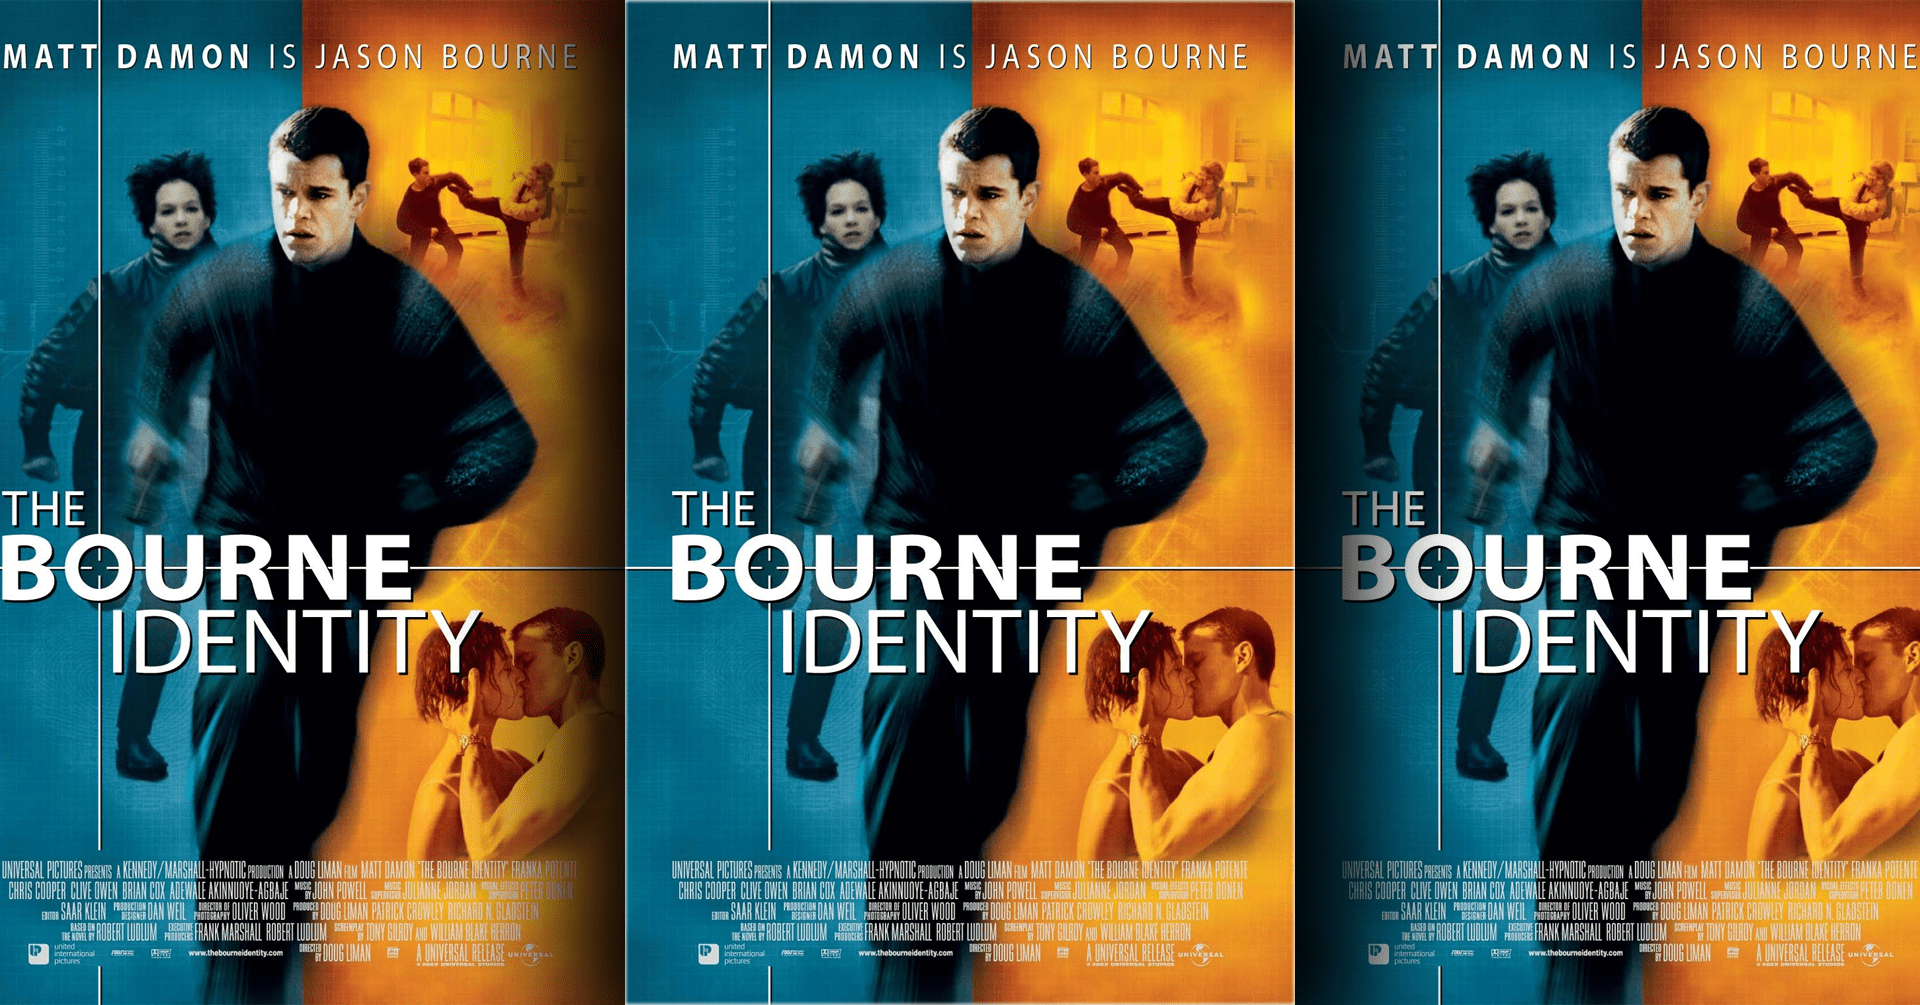 The Bourne Identity DVD cover